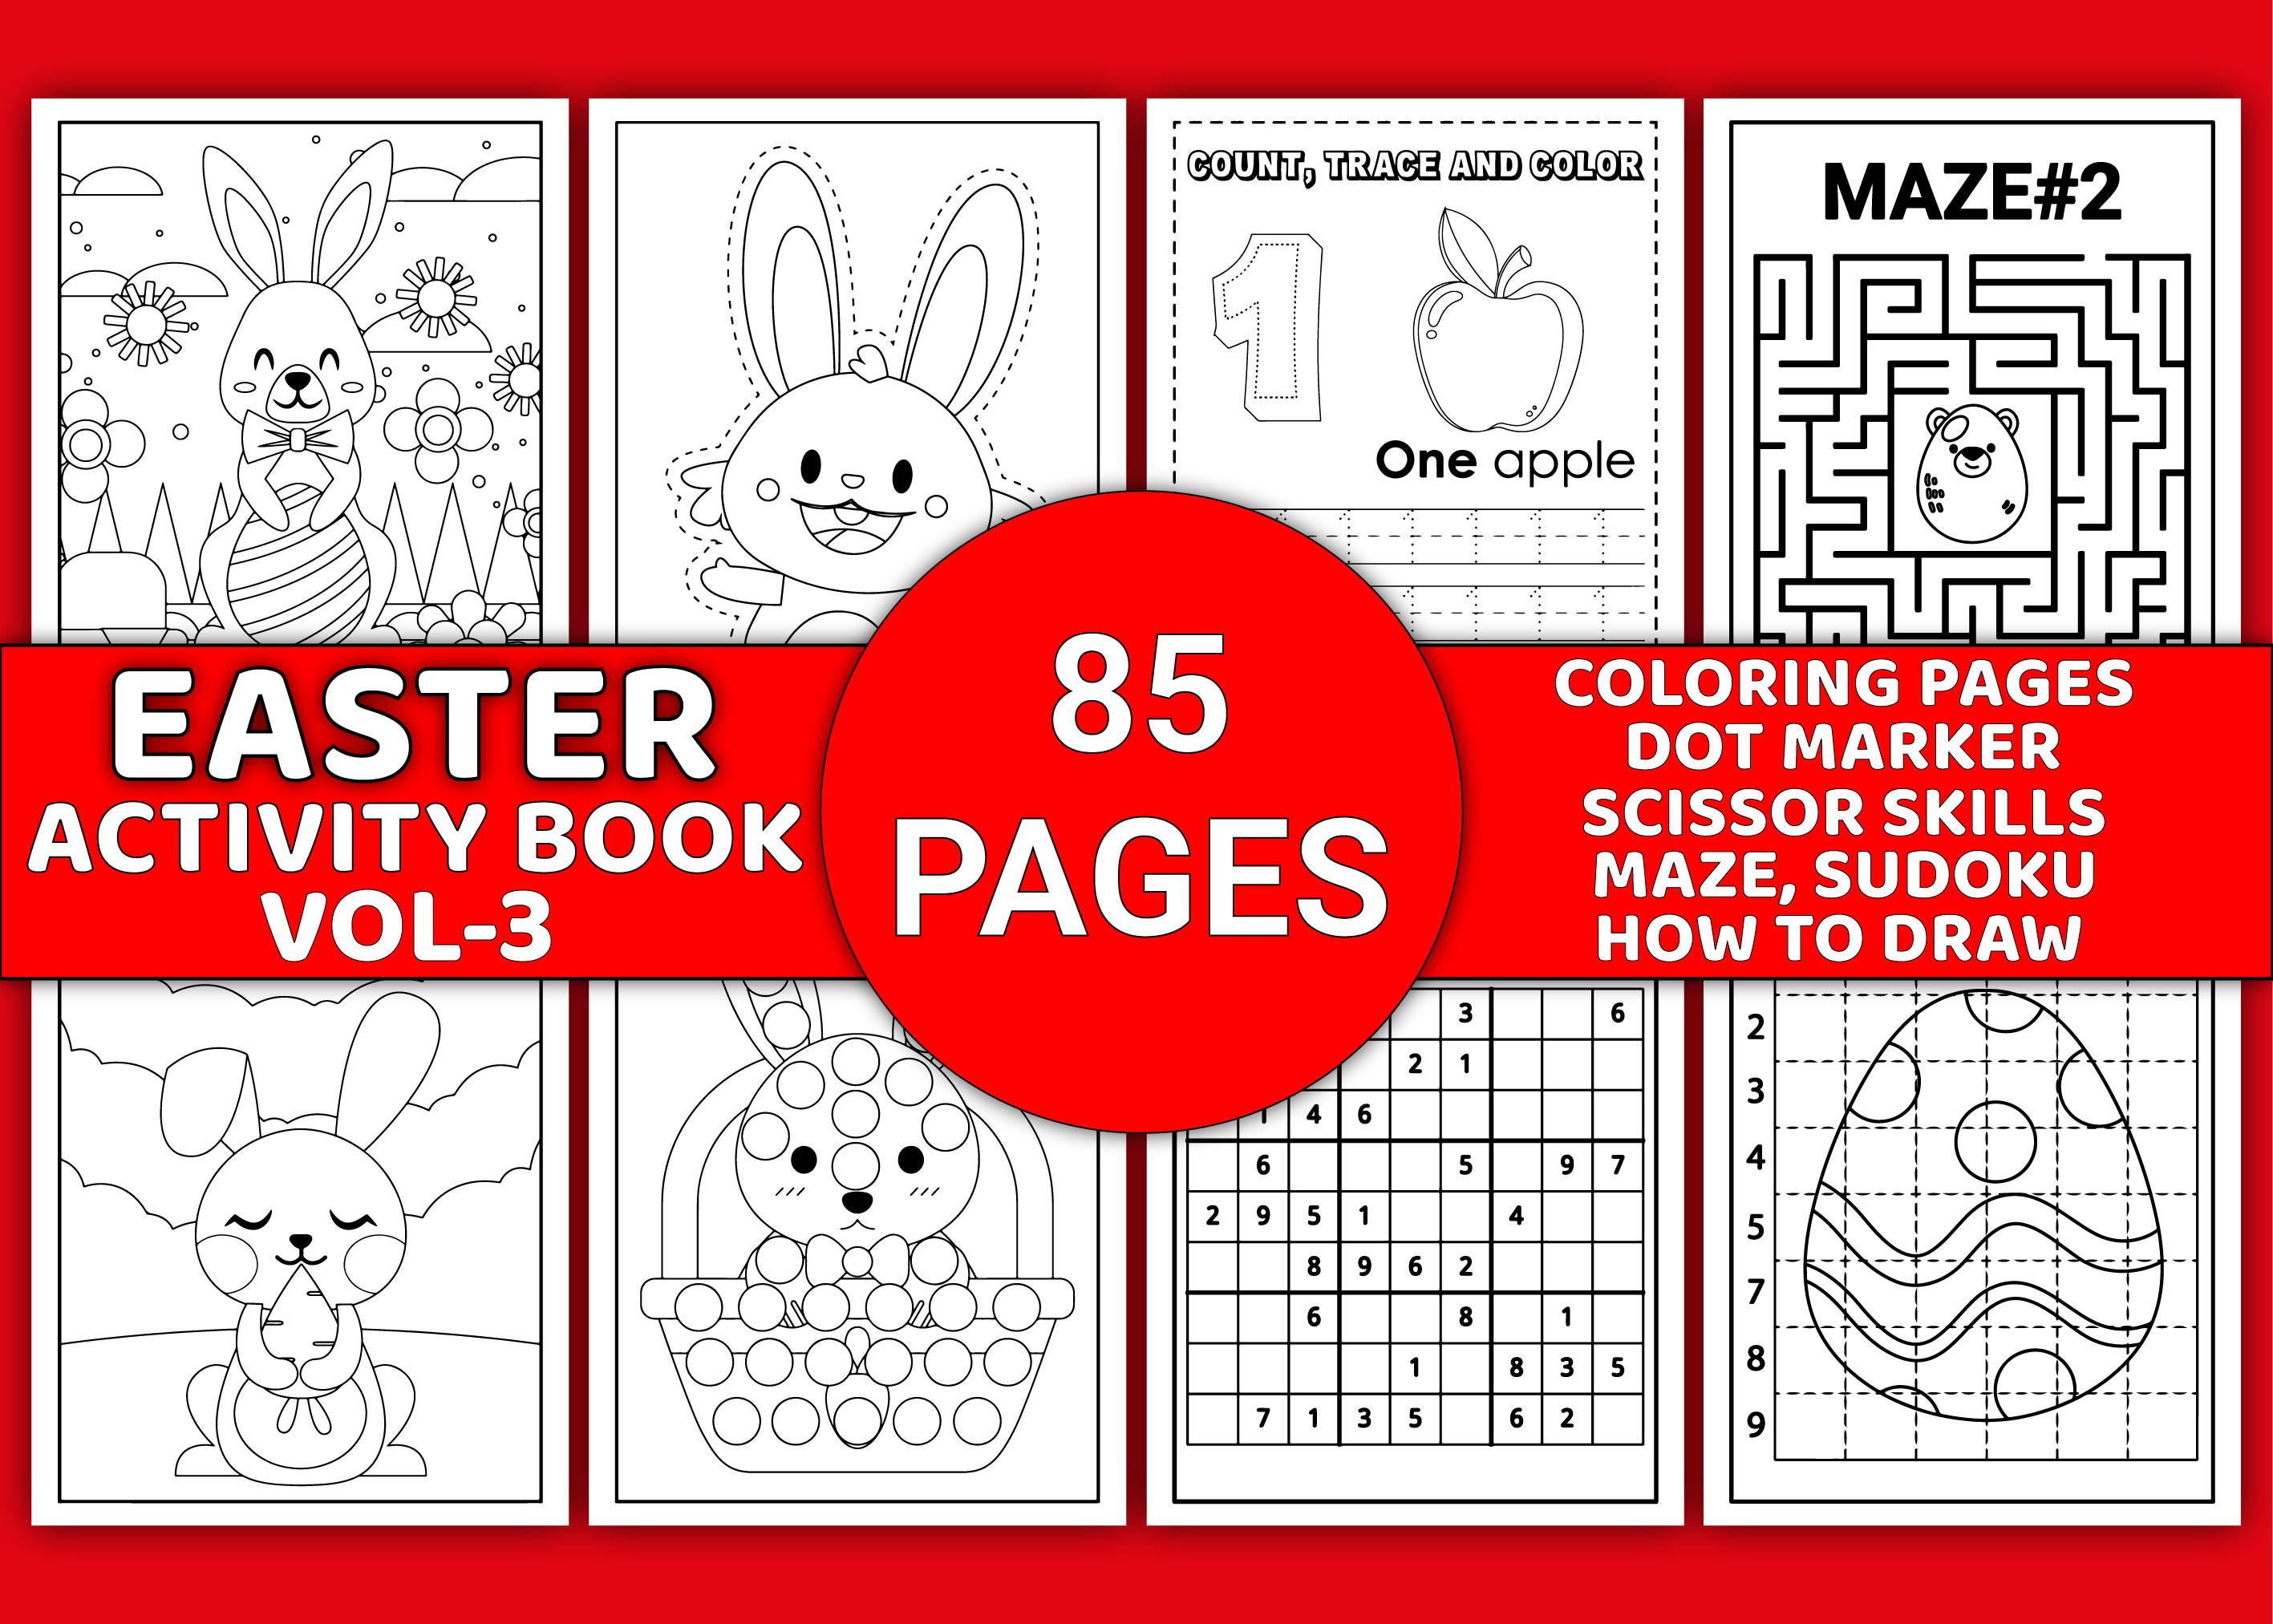 Easter Activity Book Vol-3